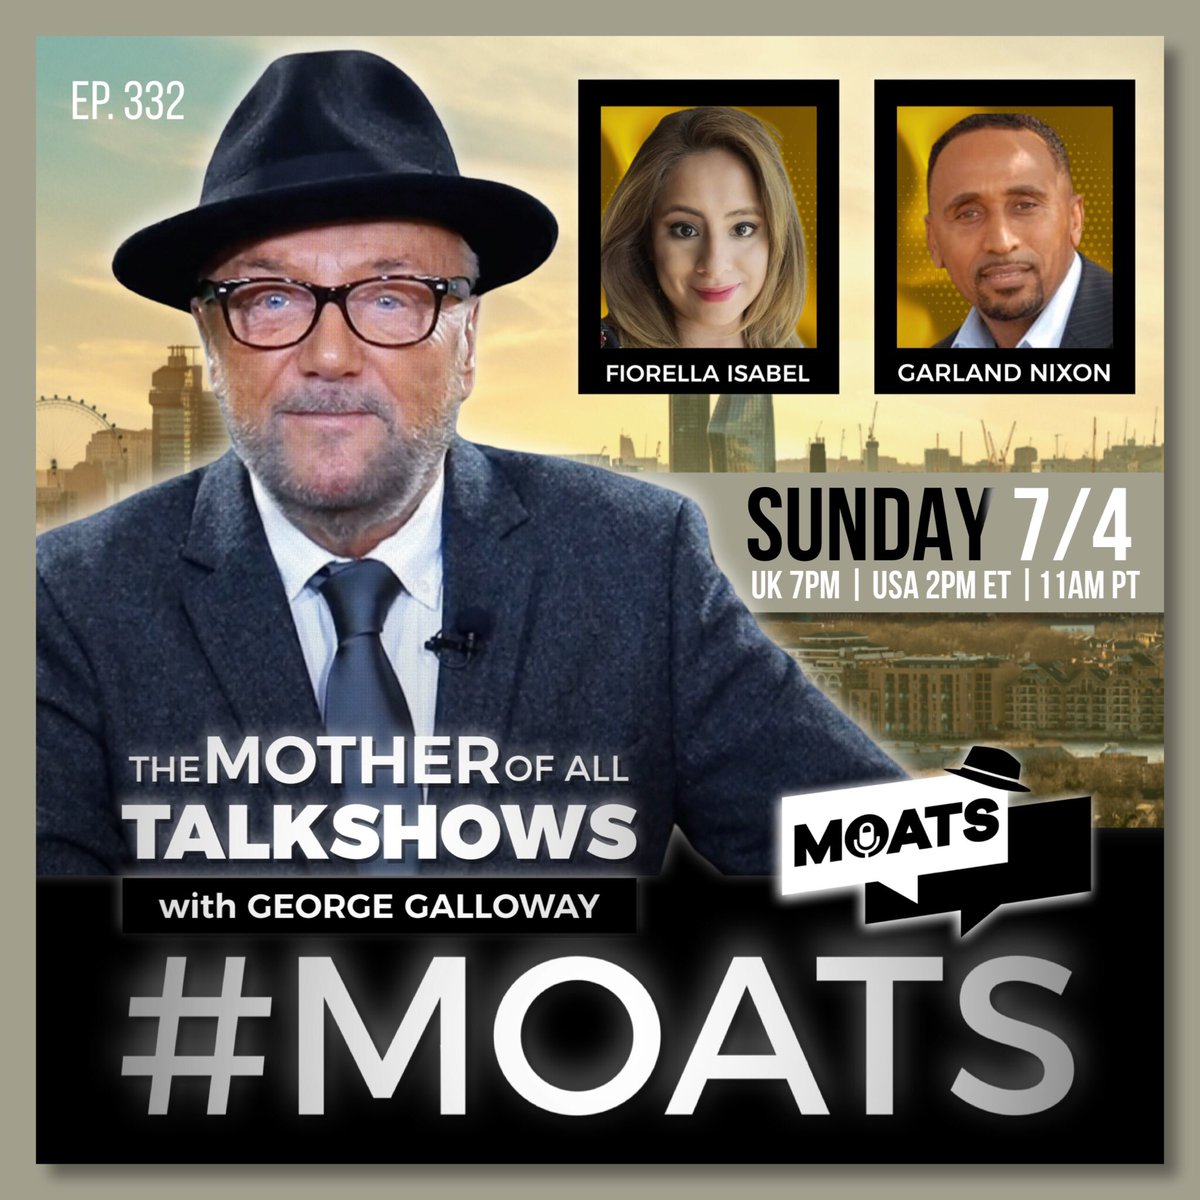 #SUNDAY Join me for The Mother of All Talk Shows! With guests @FiorellaIsabelM and @GarlandNixon #MOATS WATCH #LIVE 🇬🇧 7PM BST LONDON 🇺🇸 11AM PDT | 2PM EDT #AidWorkers #Gaza #Palestine #Israel #Biden #MoscowAttack #Starmer #UKLabour #Genocide #Rochdale